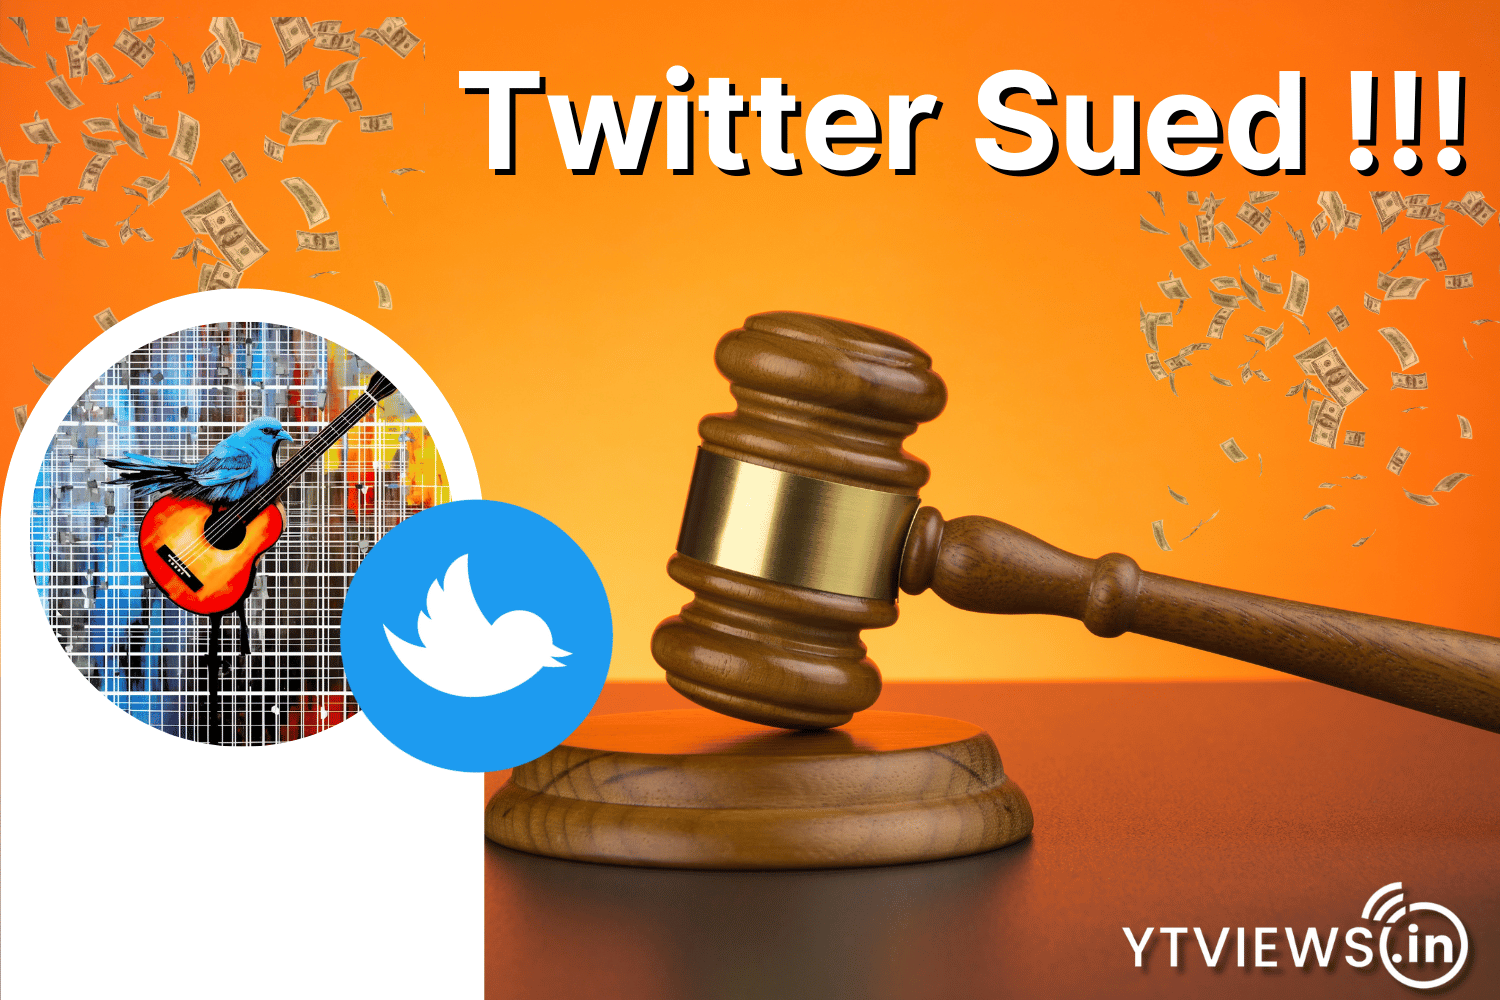 Twitter is sued for $250m !!